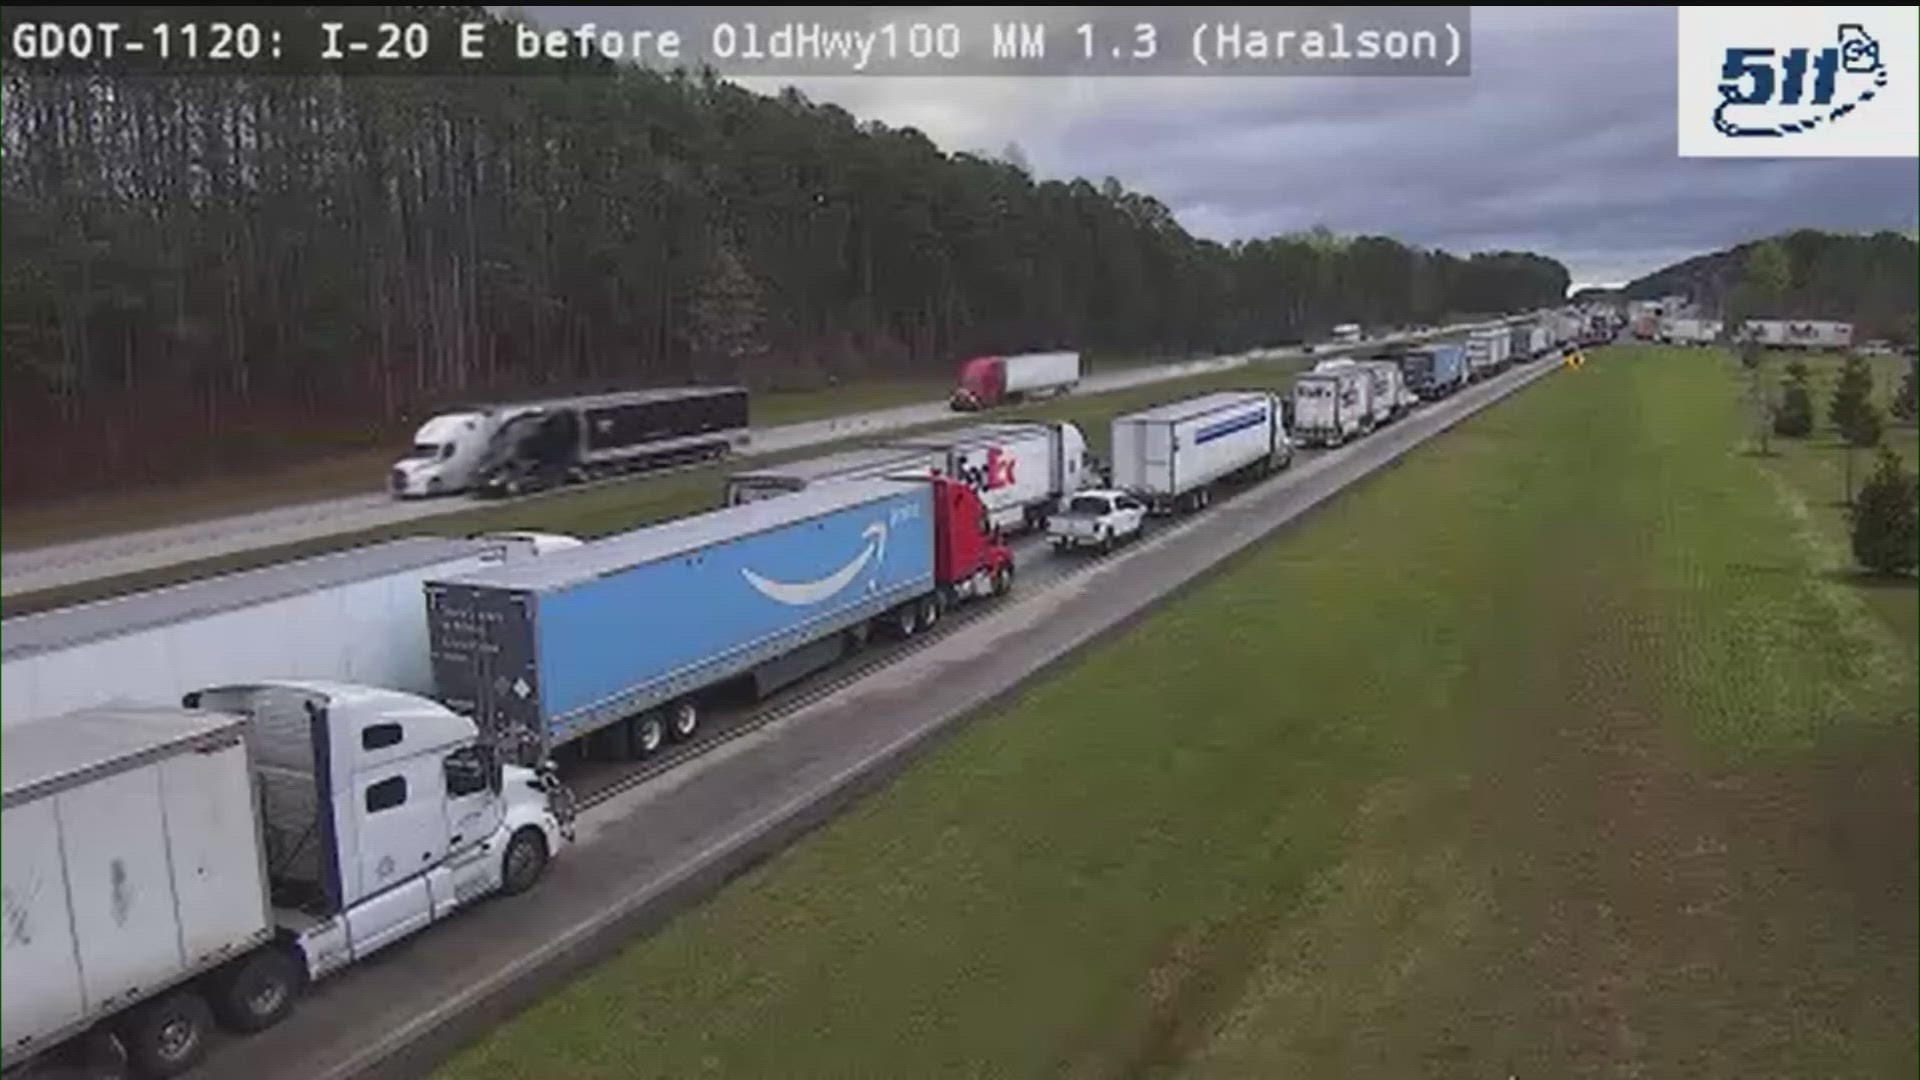 That's when deputies head out to the Georgia line on I-20 to join the pursuit.